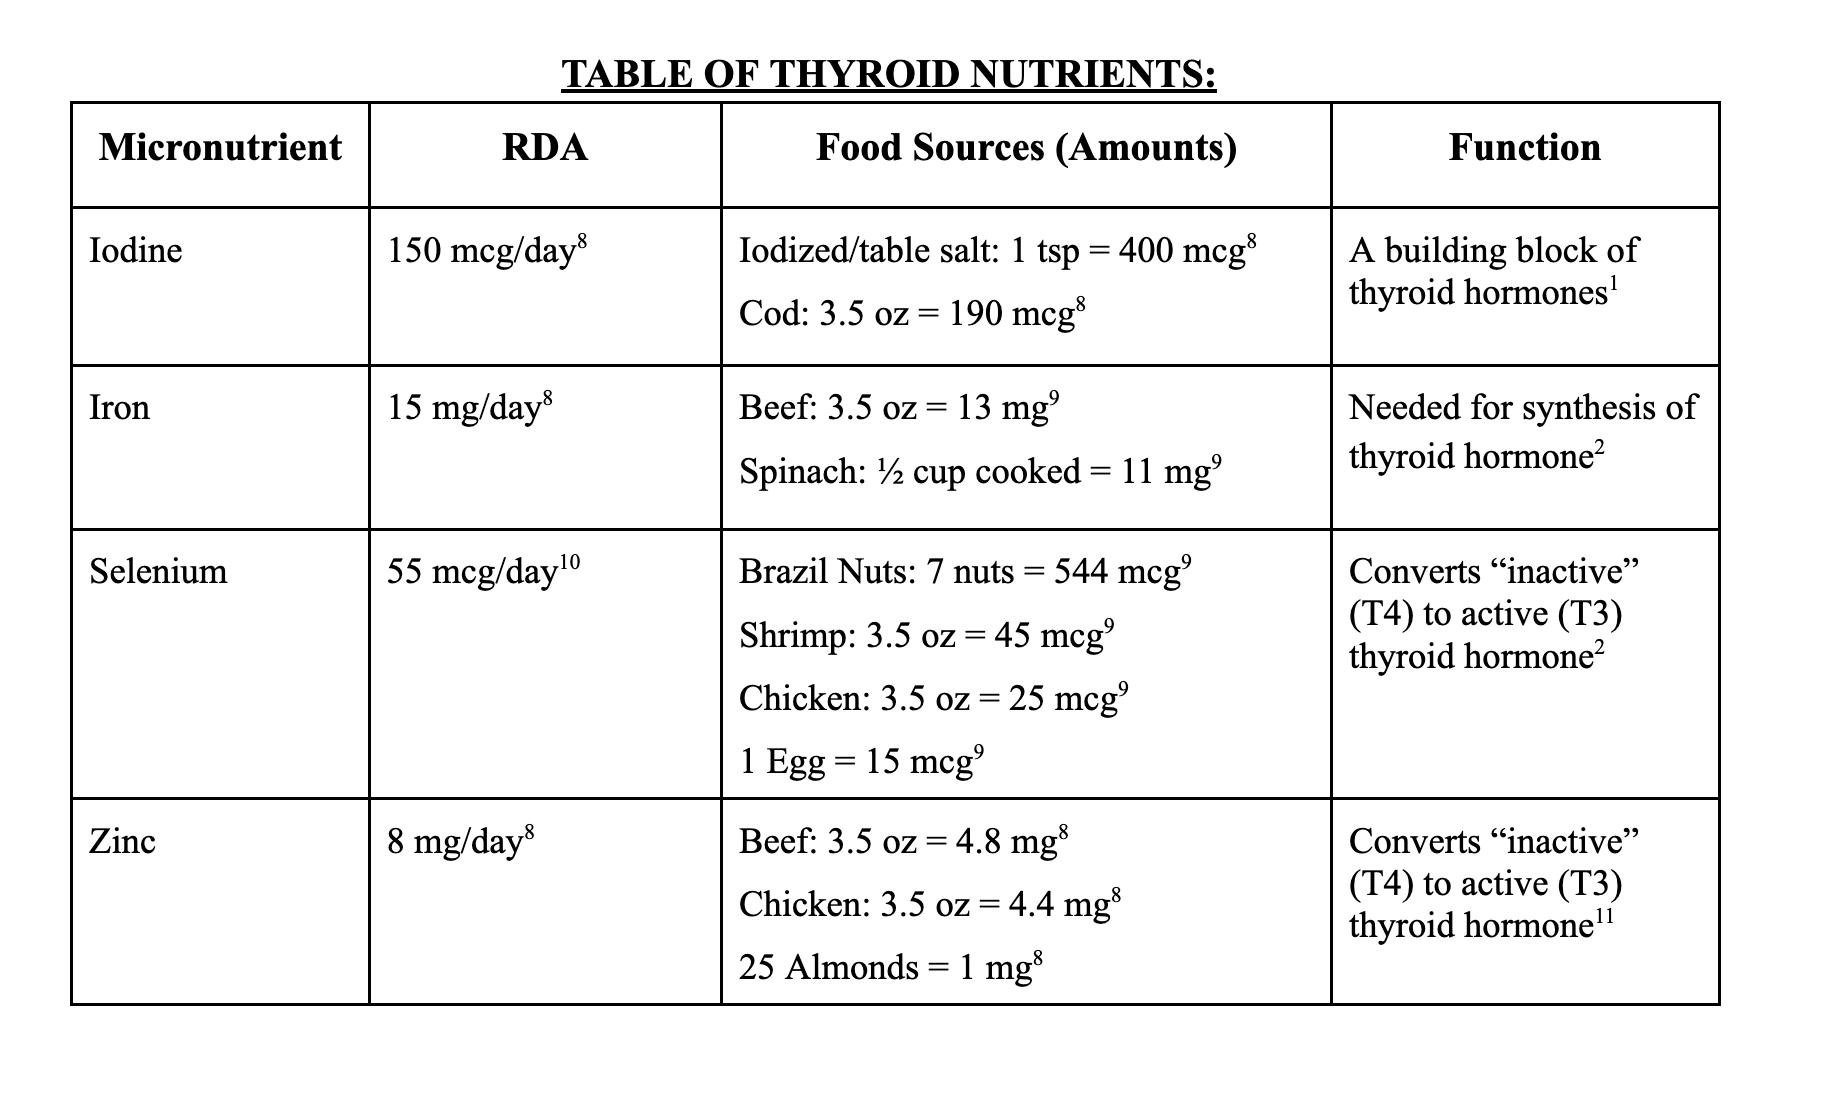 Table of Thyroid Nutrients From Lindsey Day's Top 5 Tips To Improve Thyroid Health